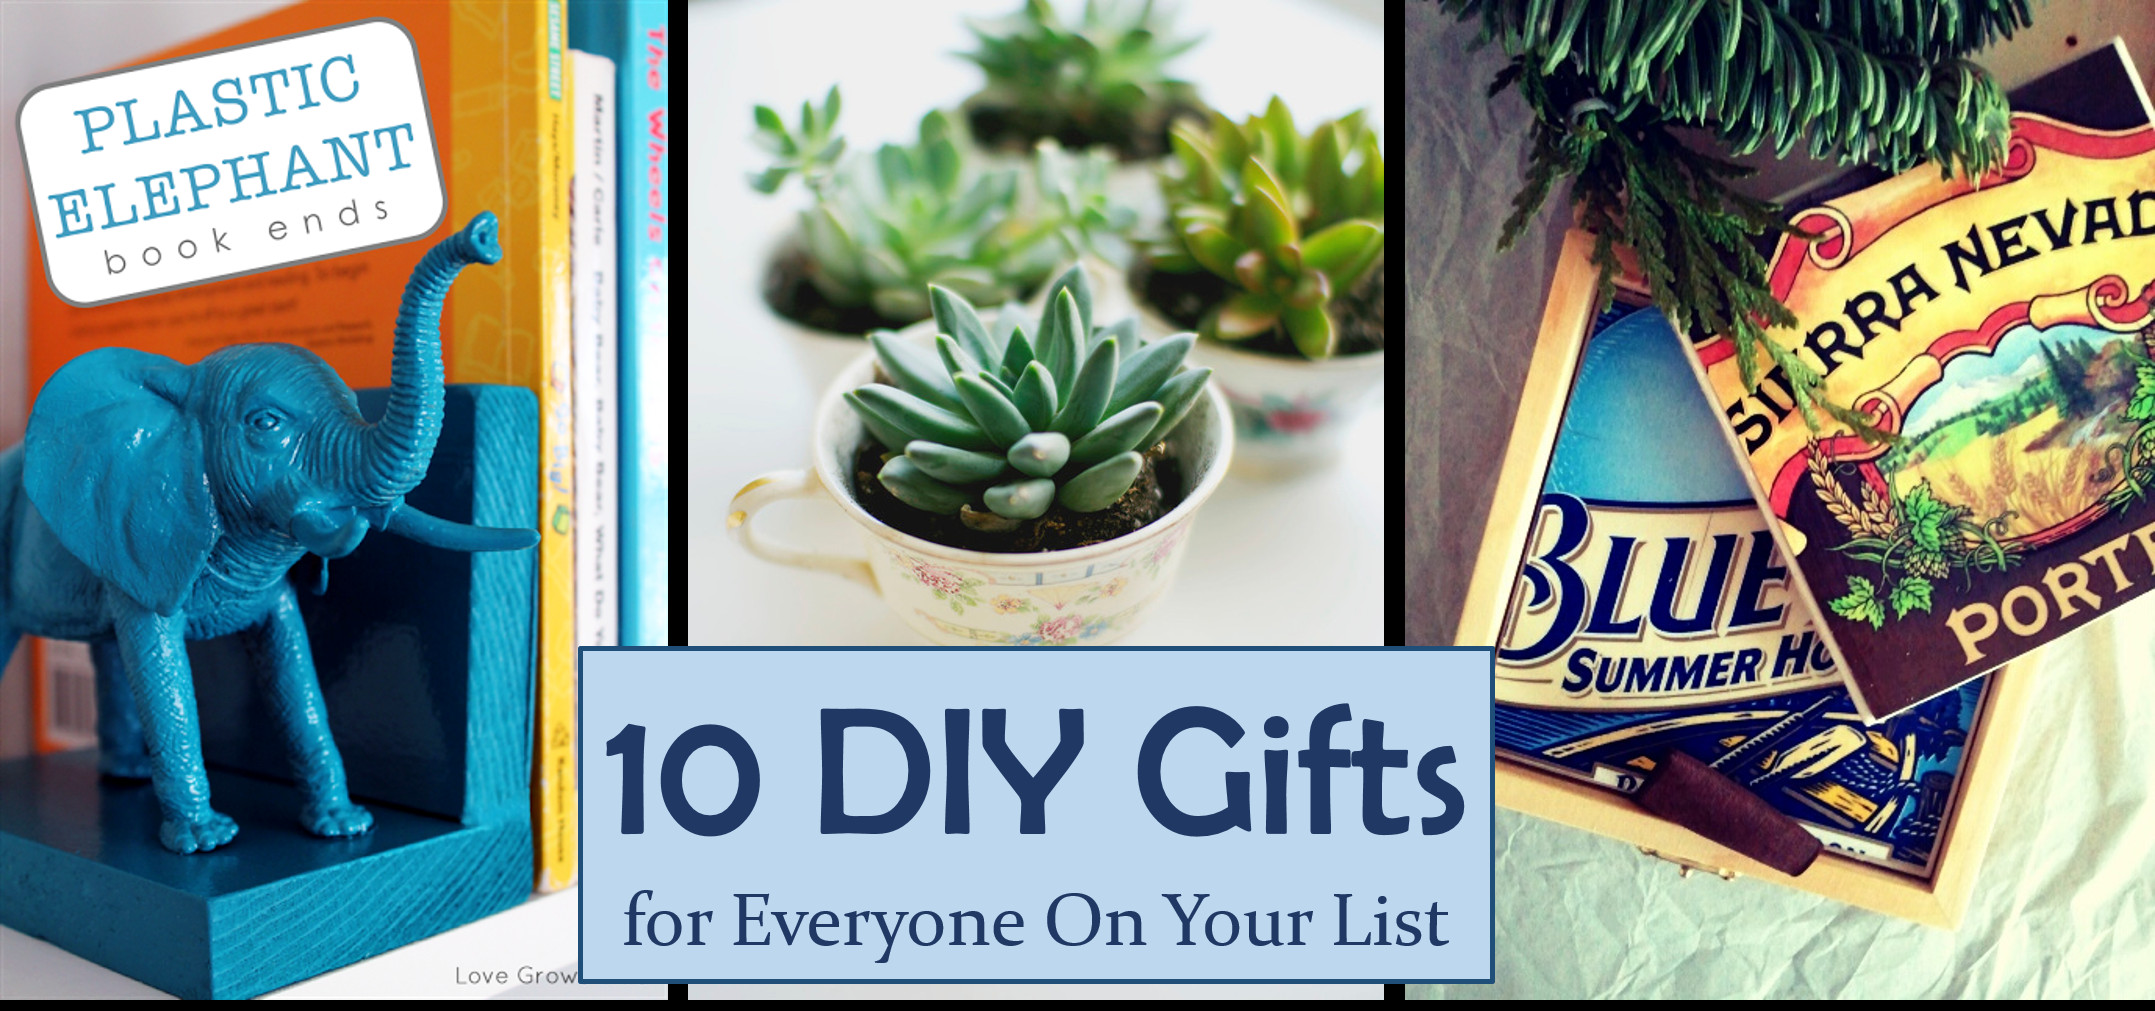 Thoughtful DIY Gifts
 10 Quick and Thoughtful DIY Gifts for Everyone on Your